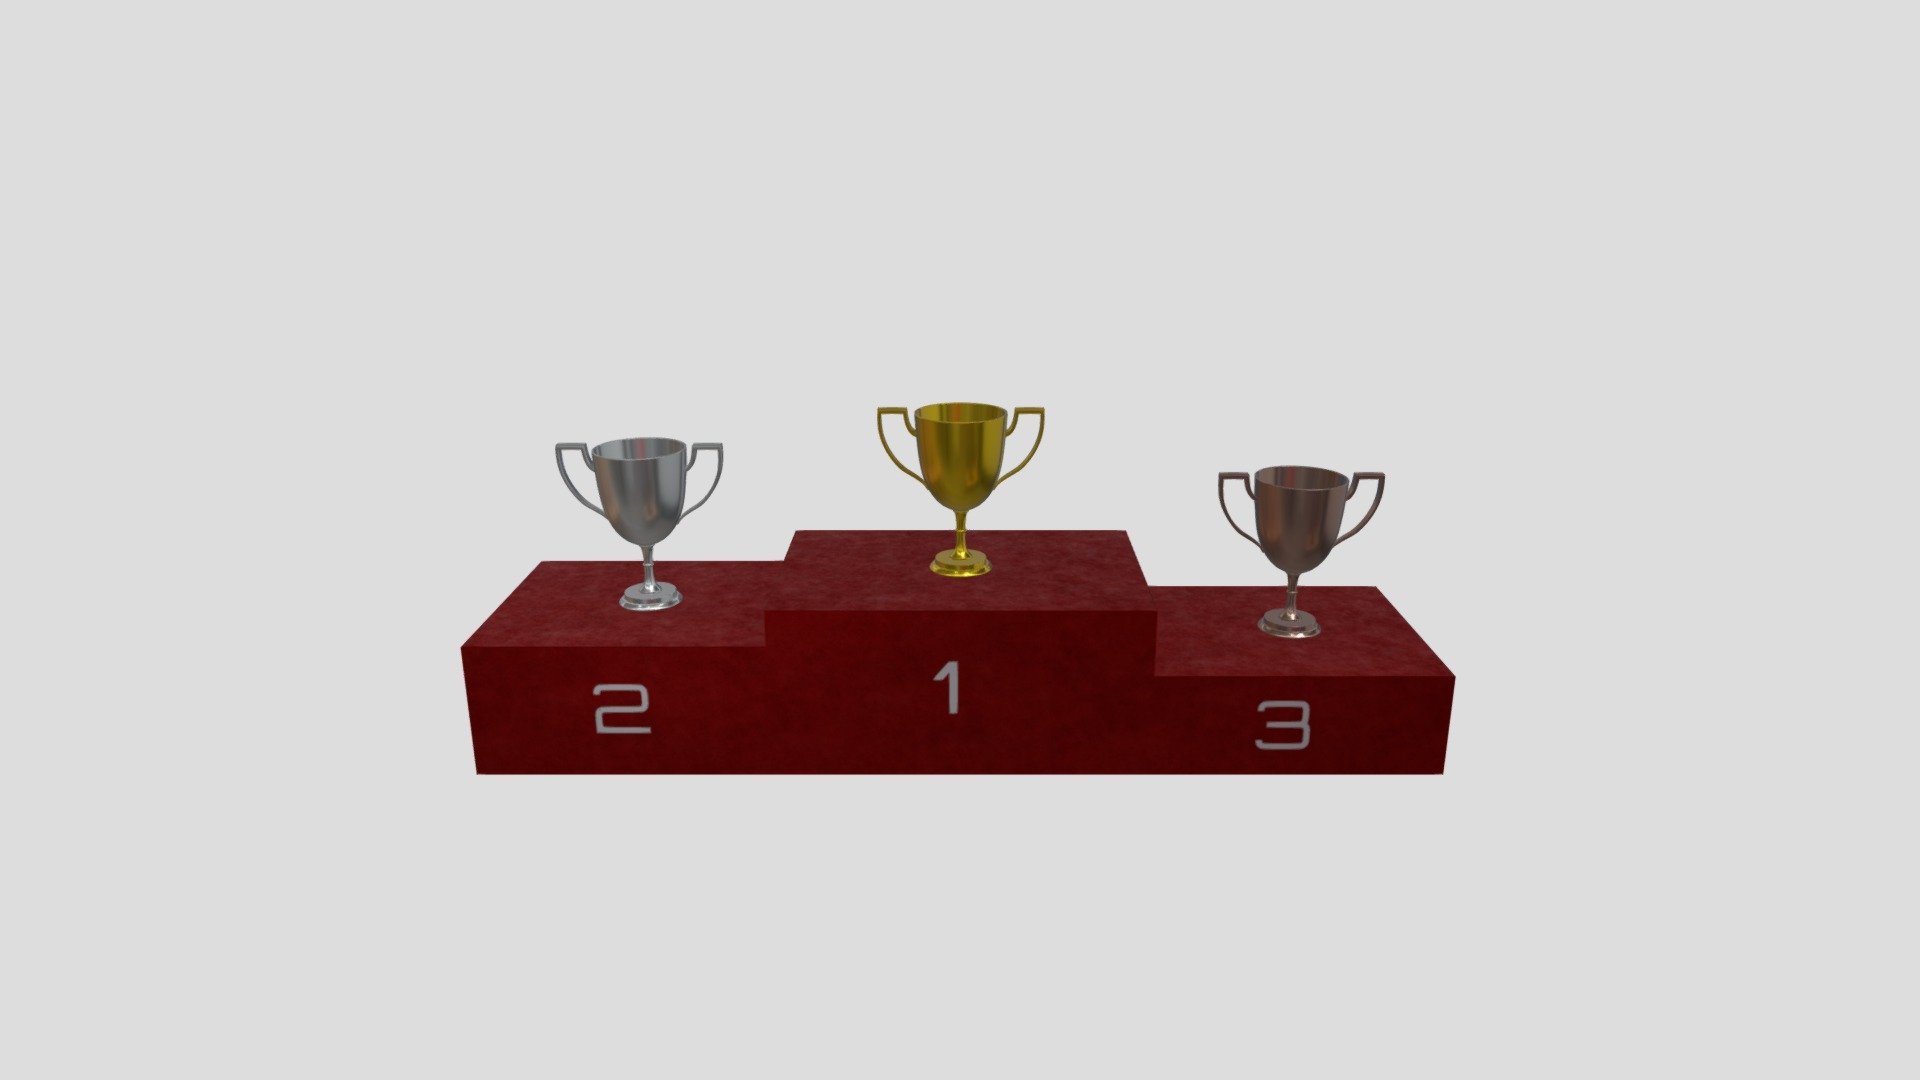 Trophy Podium

Obj, Fbx, Dae, mtl,Blend and texture (rar) file formats.

All formats tested and working.

Assets are low poly.

Assets are fully textured (PBR), 2048x2048 .png’s.

All formats tested and working.

The models are polygonal (verts and tris).

UVMapped, Low-poly 3D model.

For ease of use, objects are named logically (using the English language).

Face orientation is ok.

When importing, selecting, if necessary, you can change the size of the model.

The package includes texture and uv mapping.

Basecolor Map, Metallic Map, Roughness Map end Normal Map.

This part, while simple, has been tested with confidence and peace of mind that it can be downloaded 3d model